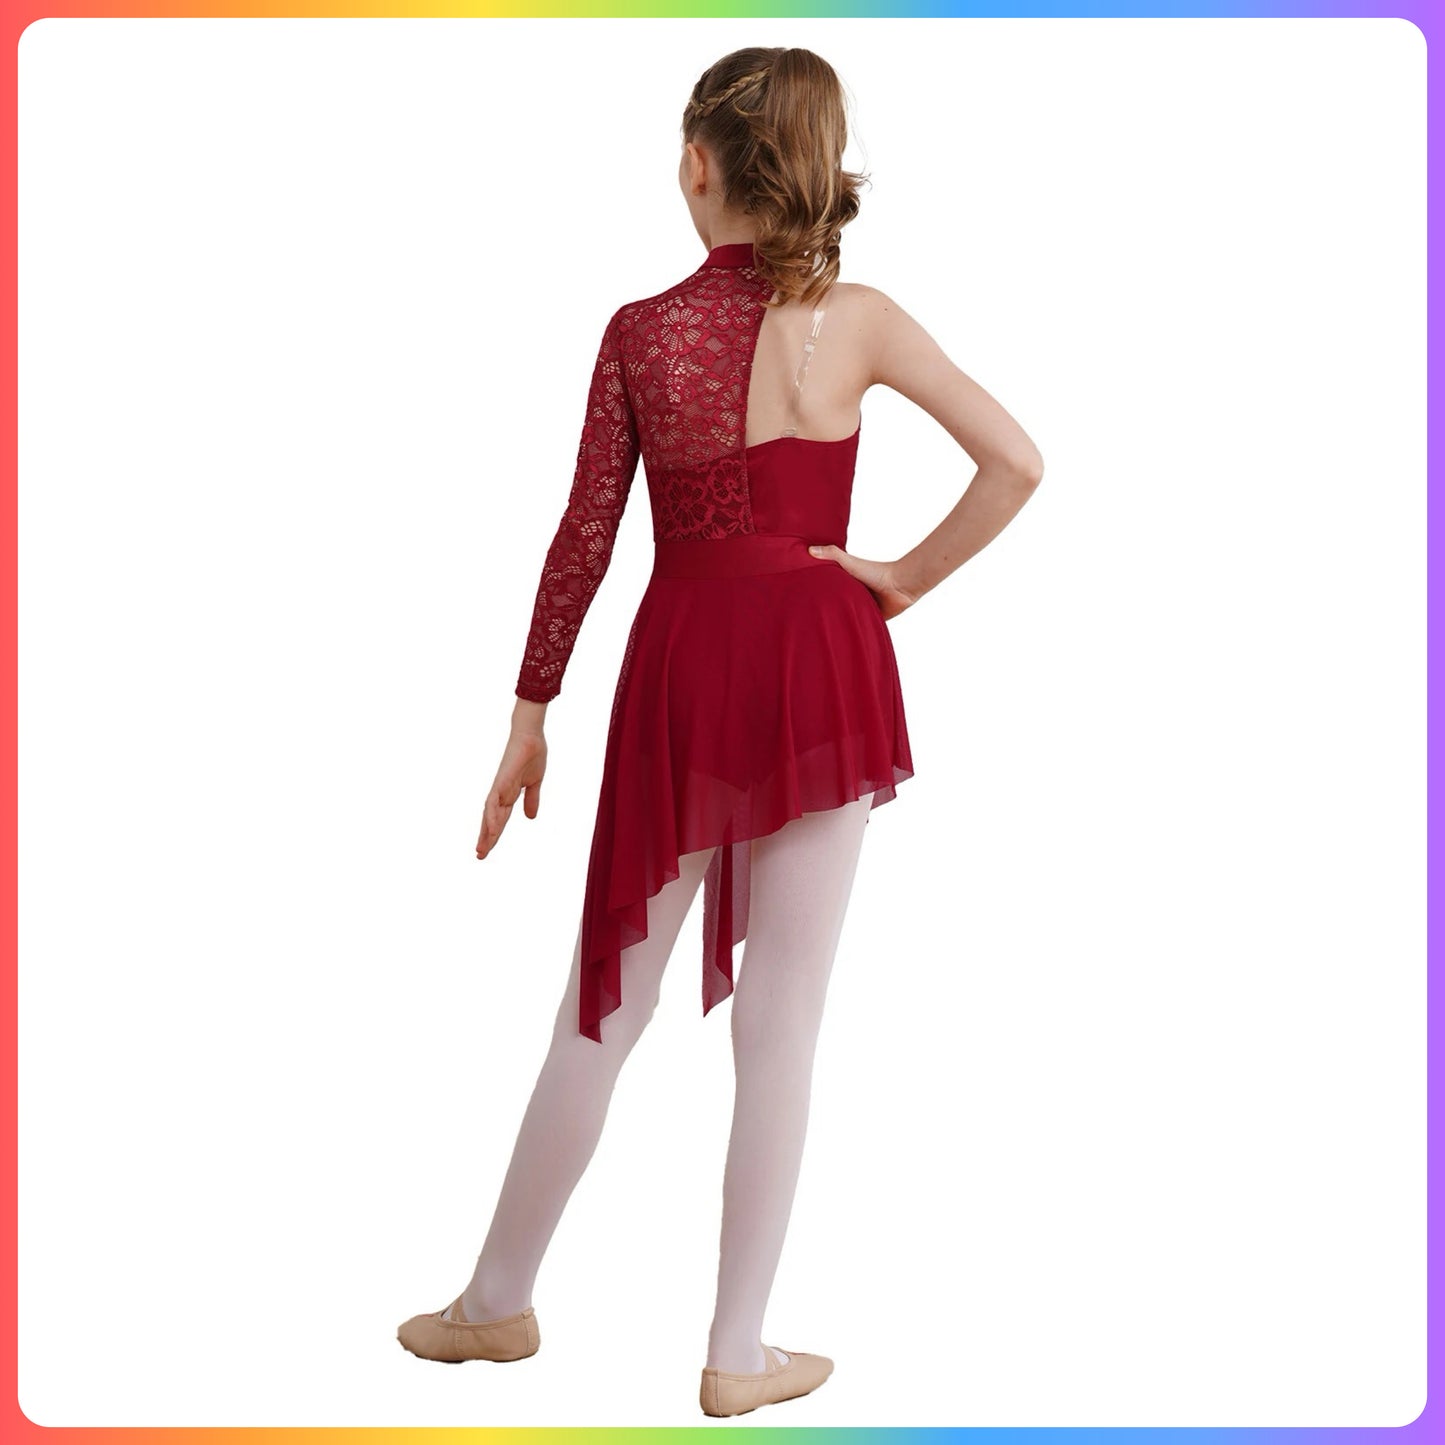 Girls Lace One Sleeve Lyrical / Contemporary Dance Costume